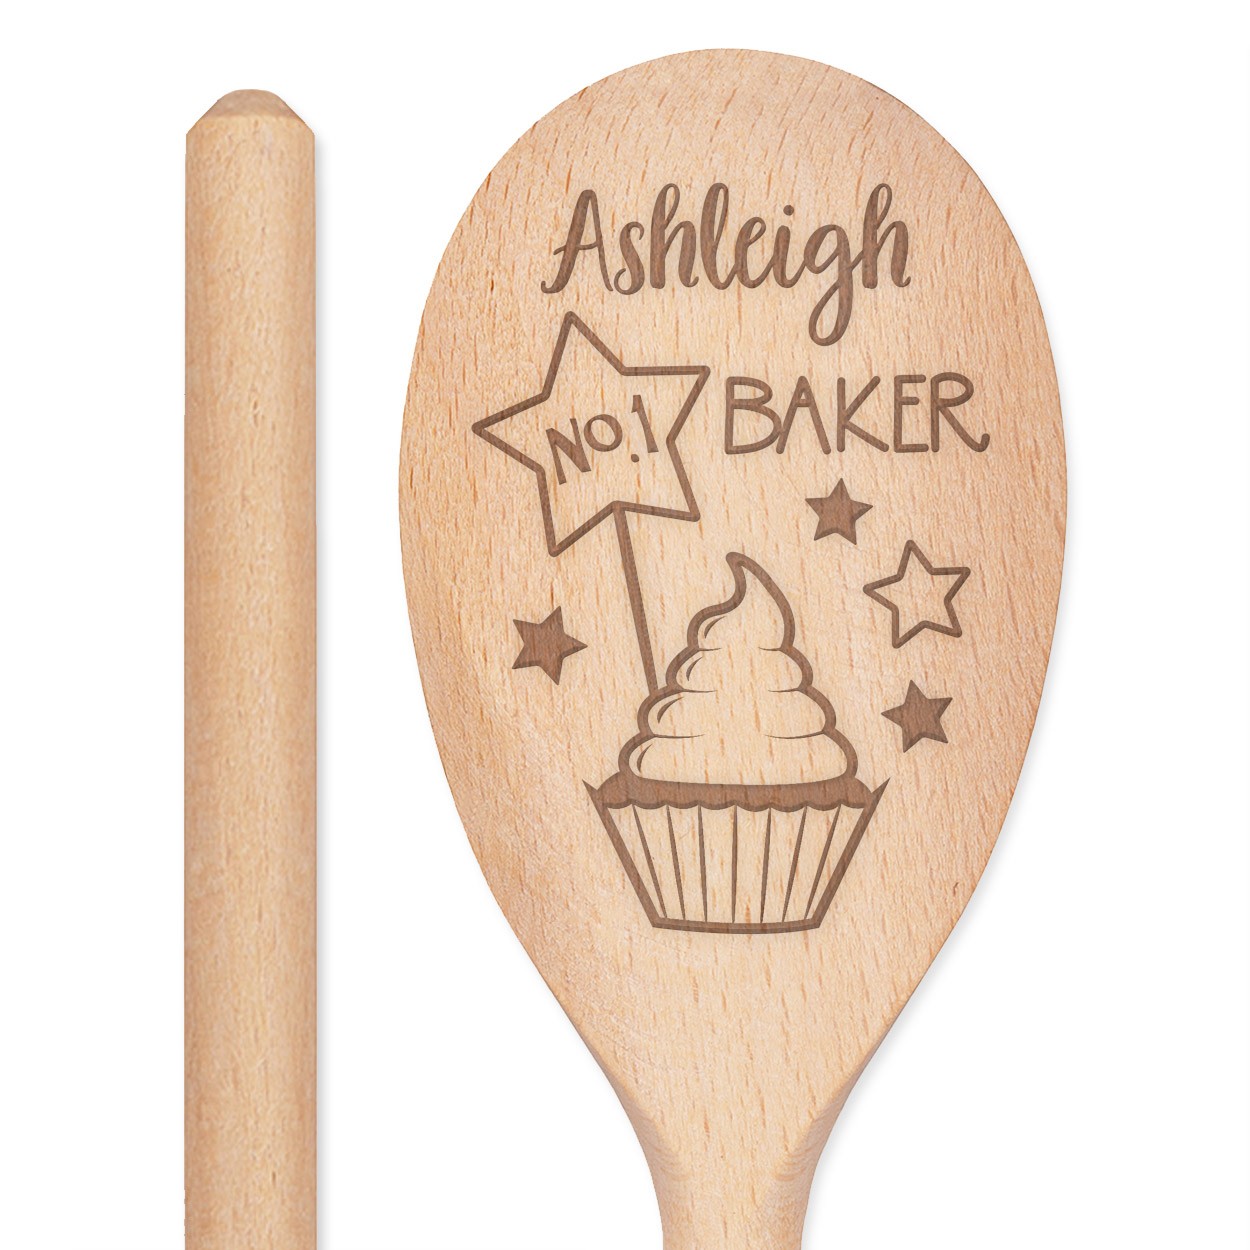 Personalised Custom Engraved Wooden Spoon No1 Baker Any Name Text